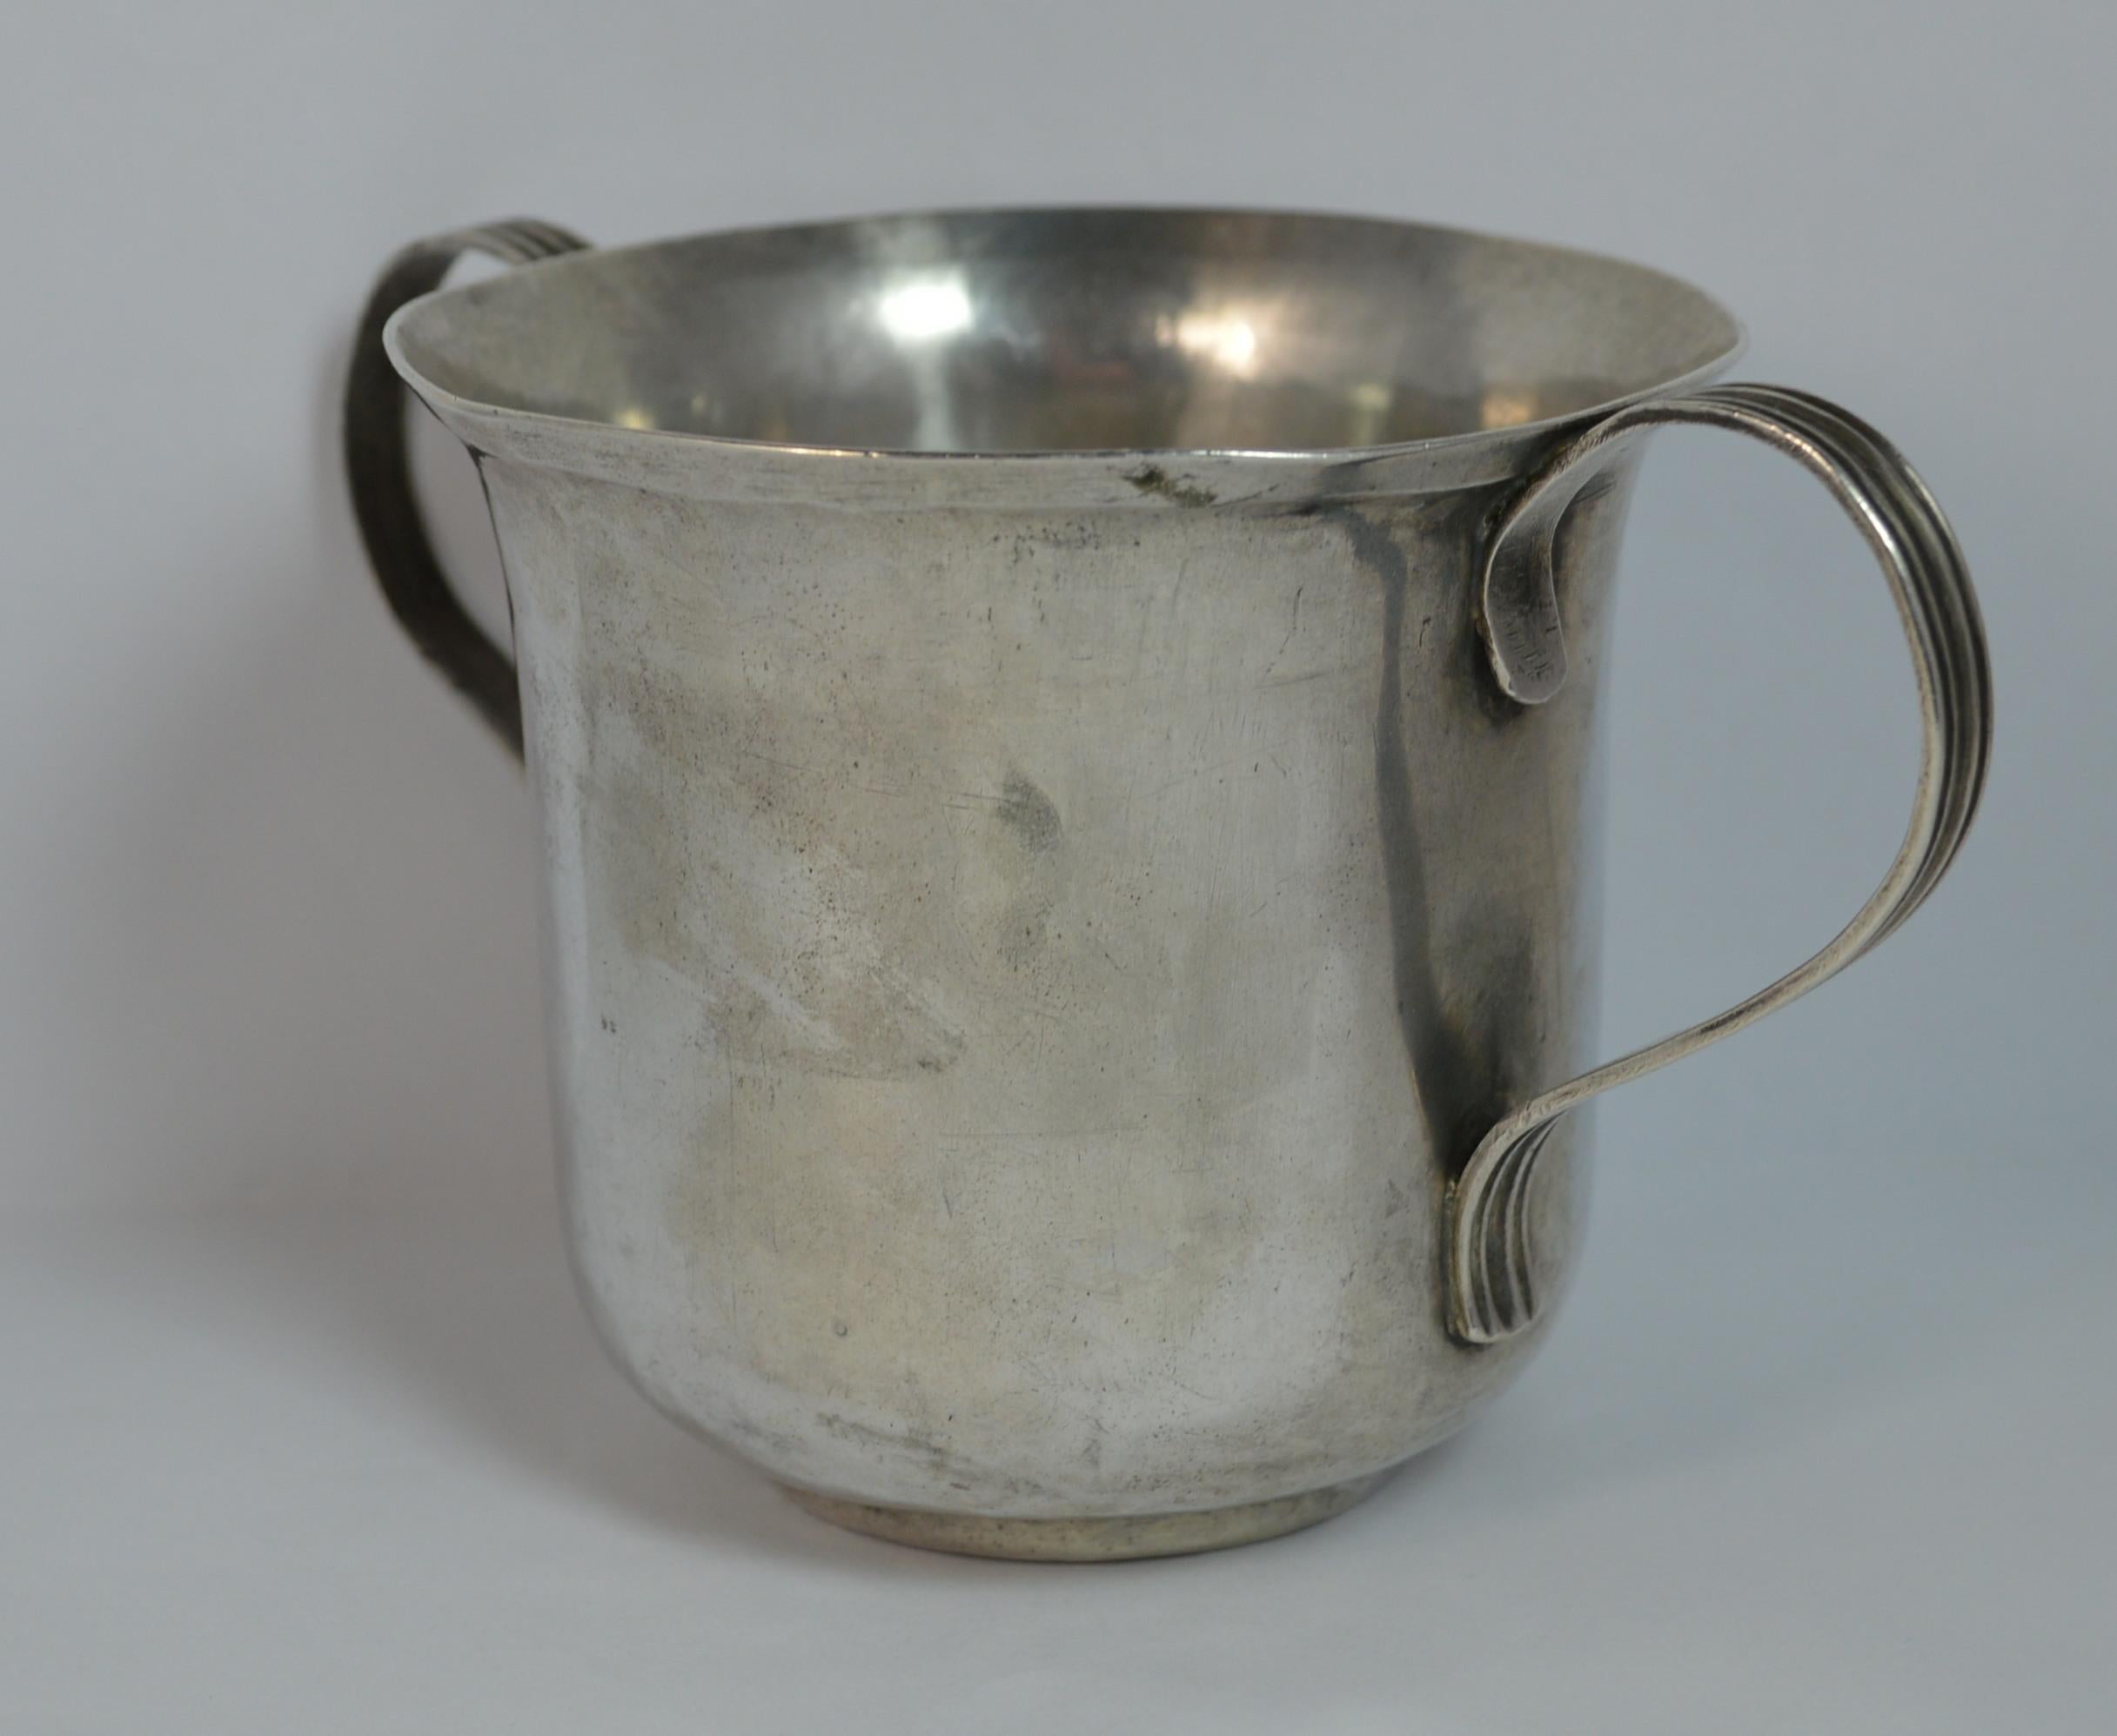 A quality sterling silver early Georgian two handled cup / porringer / bowl.
Finely made, plain, lightly hammered finish, all original.

Hallmarks ; lion, London assay, makers marks, date letter for 1768
Size ; 80mm diameter top, 70mm tall
Weight ;